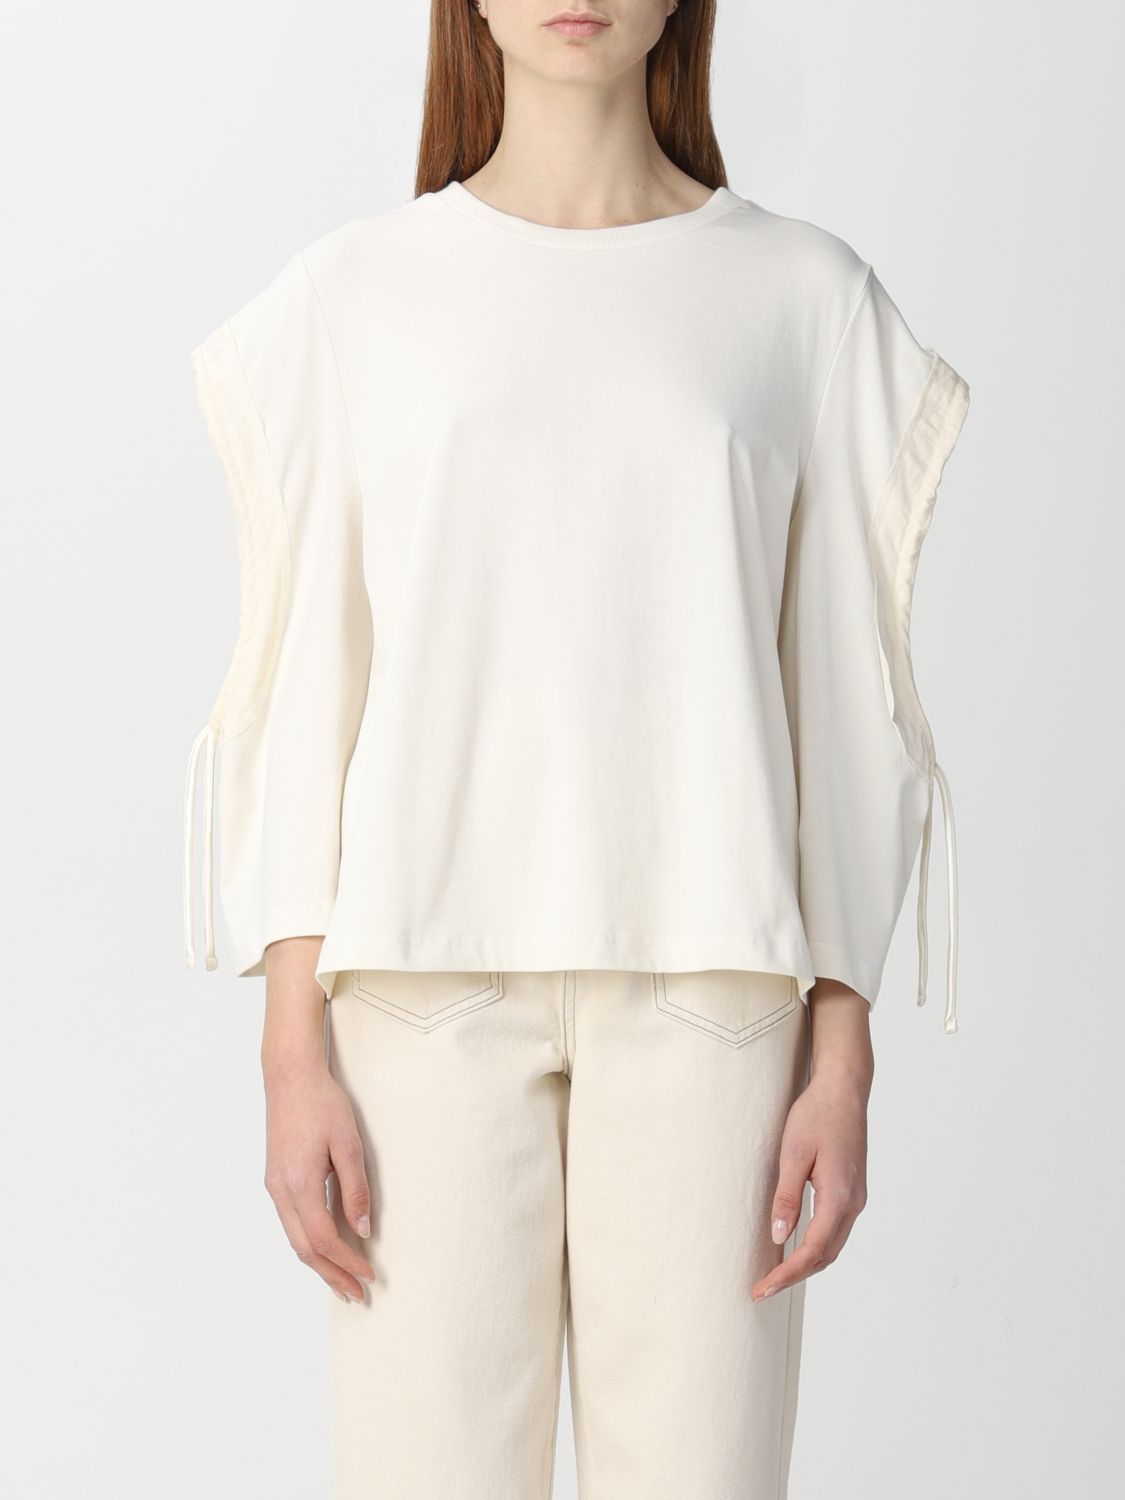 Actitude Twinset Twinset-actitude Cotton Sweatshirt With Cut-out In Yellow Cream